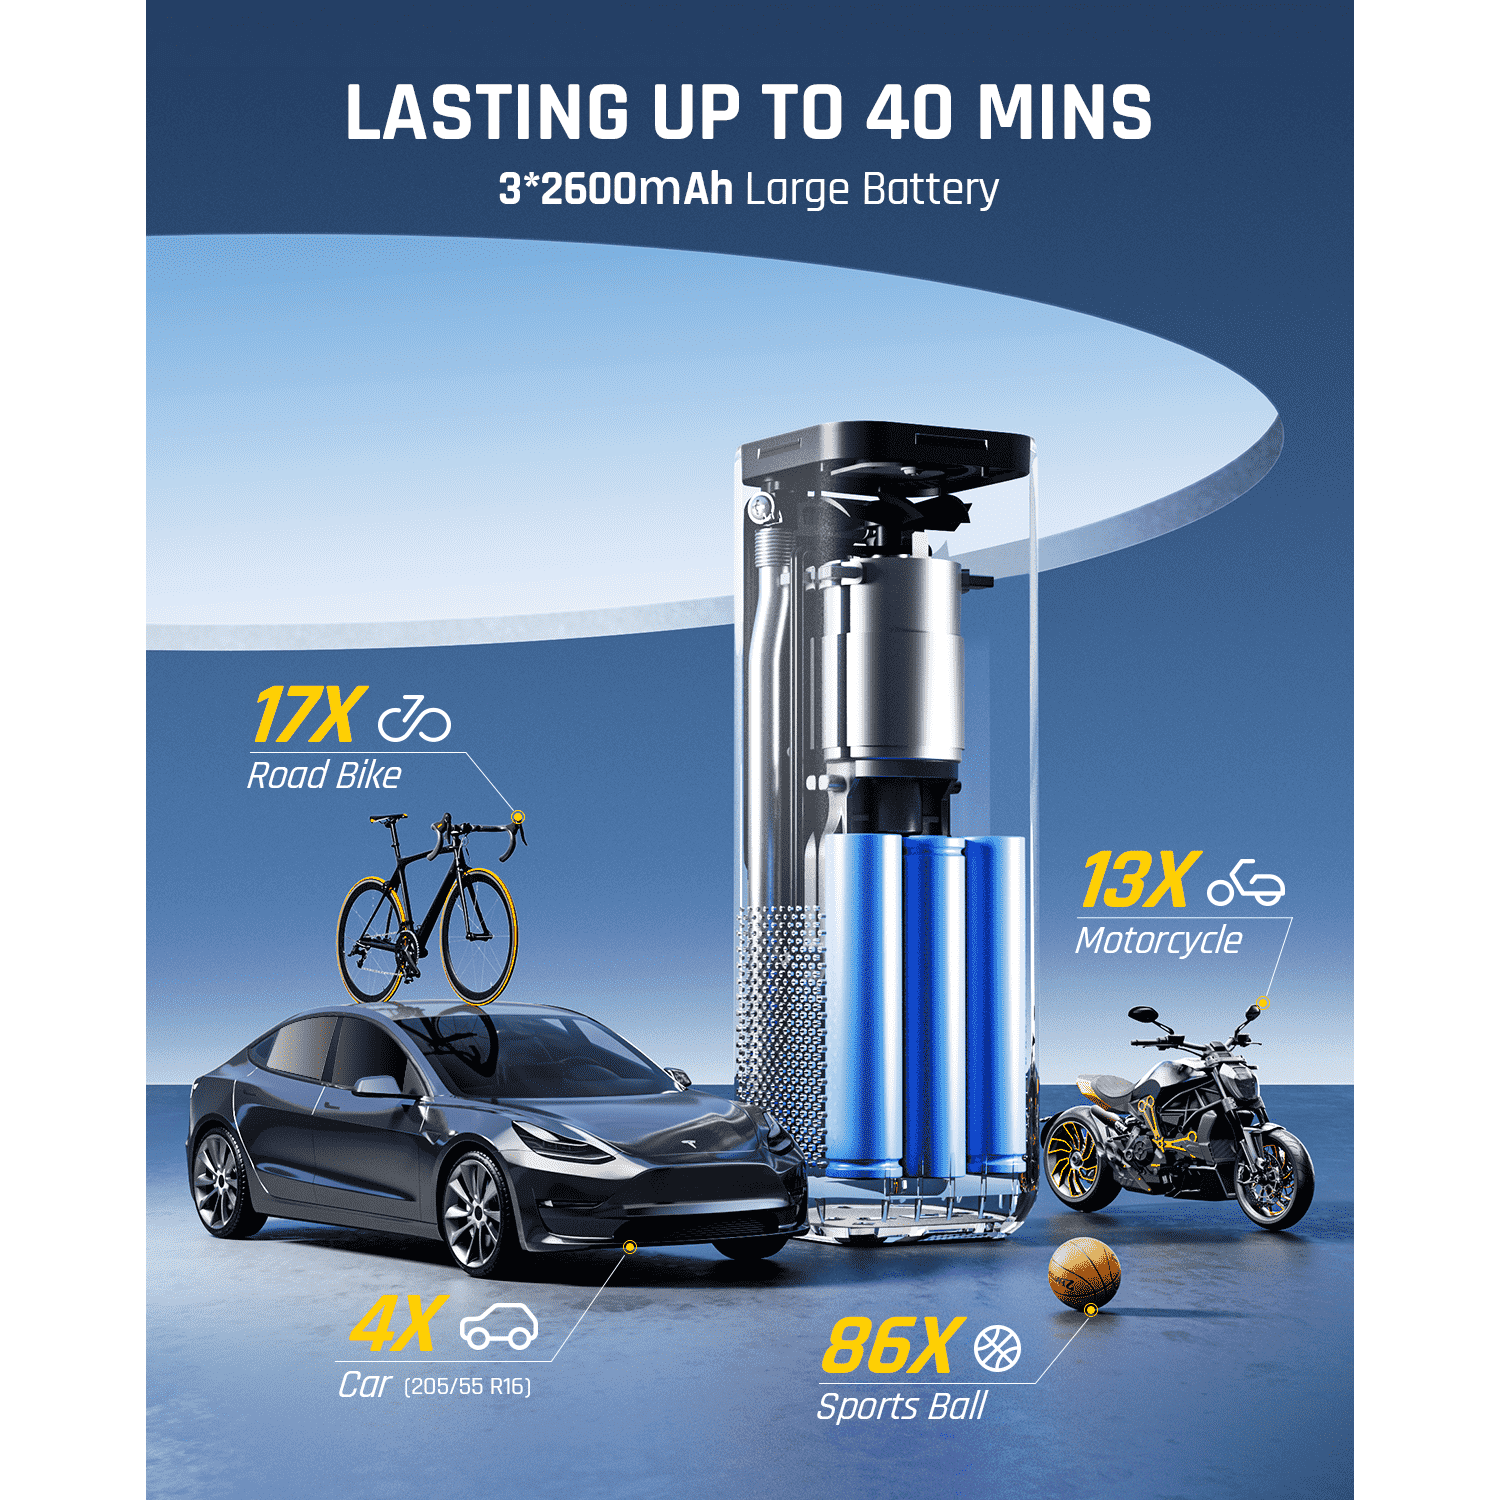 7800mAh battery, X8 APEX is perfect for inflating cars, motorcycles, bikes, balls, and other inflatables, including new-energy vehicles like Tesla